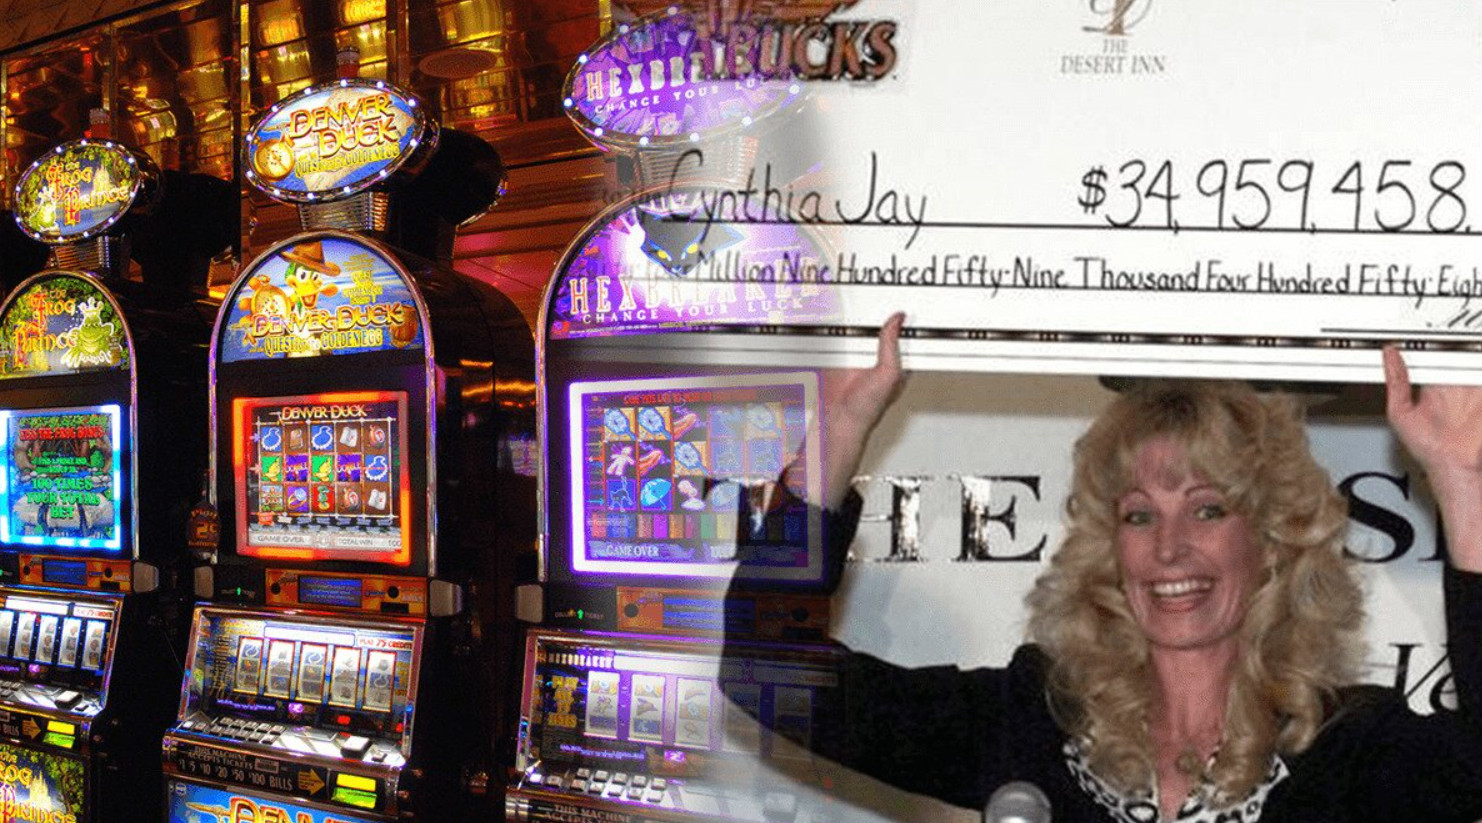 The biggest slot machine winnings of all time